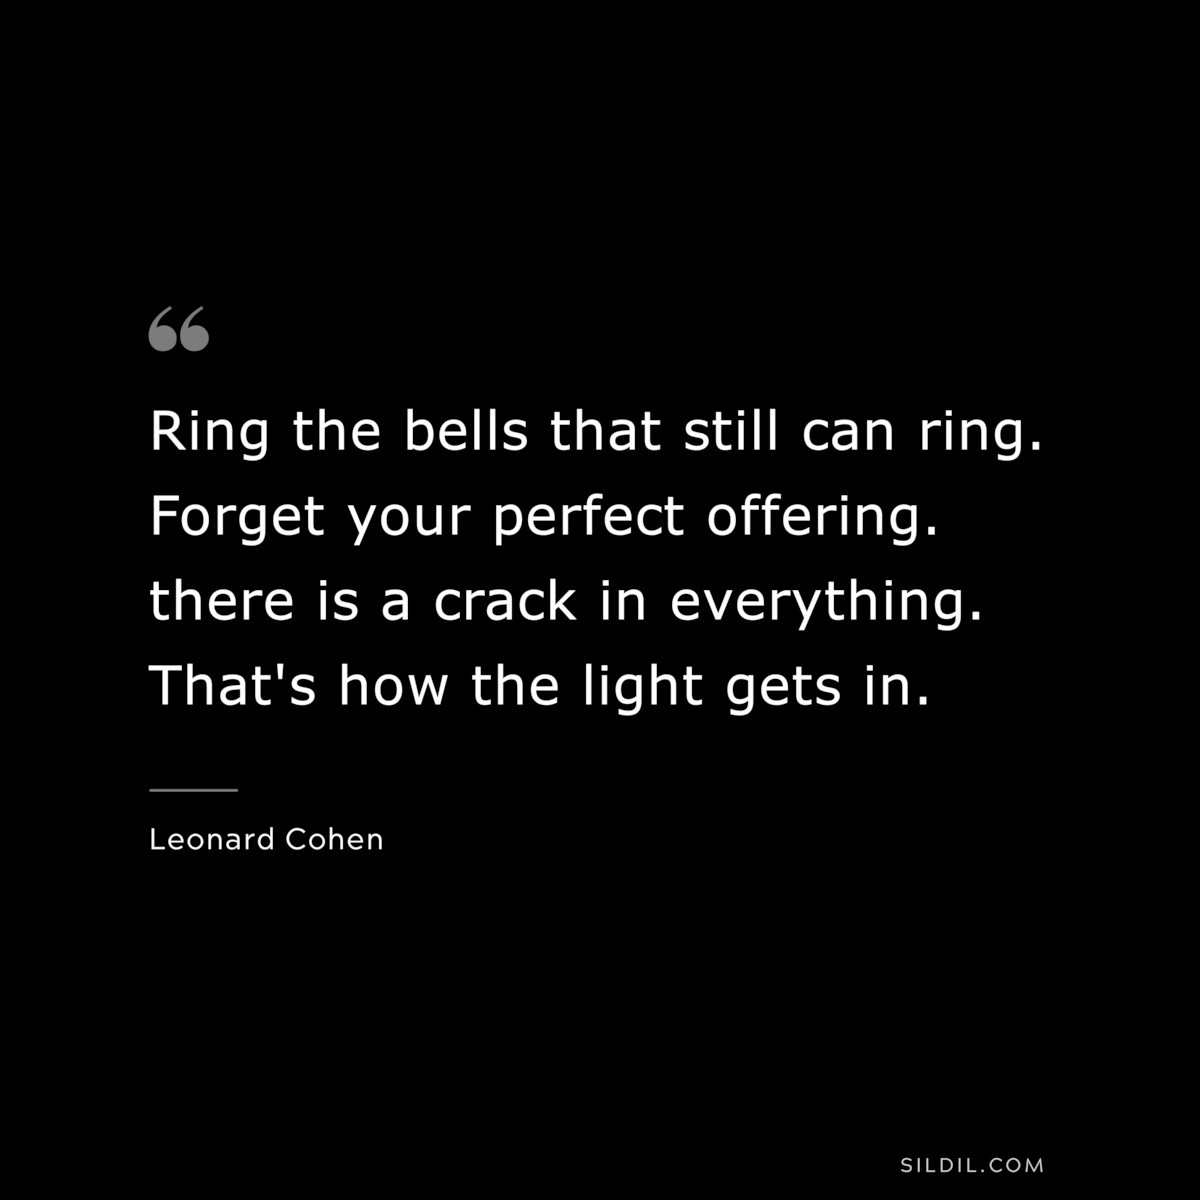 Ring the bells that still can ring. Forget your perfect offering. there is a crack in everything. That's how the light gets in. ― Leonard Cohen